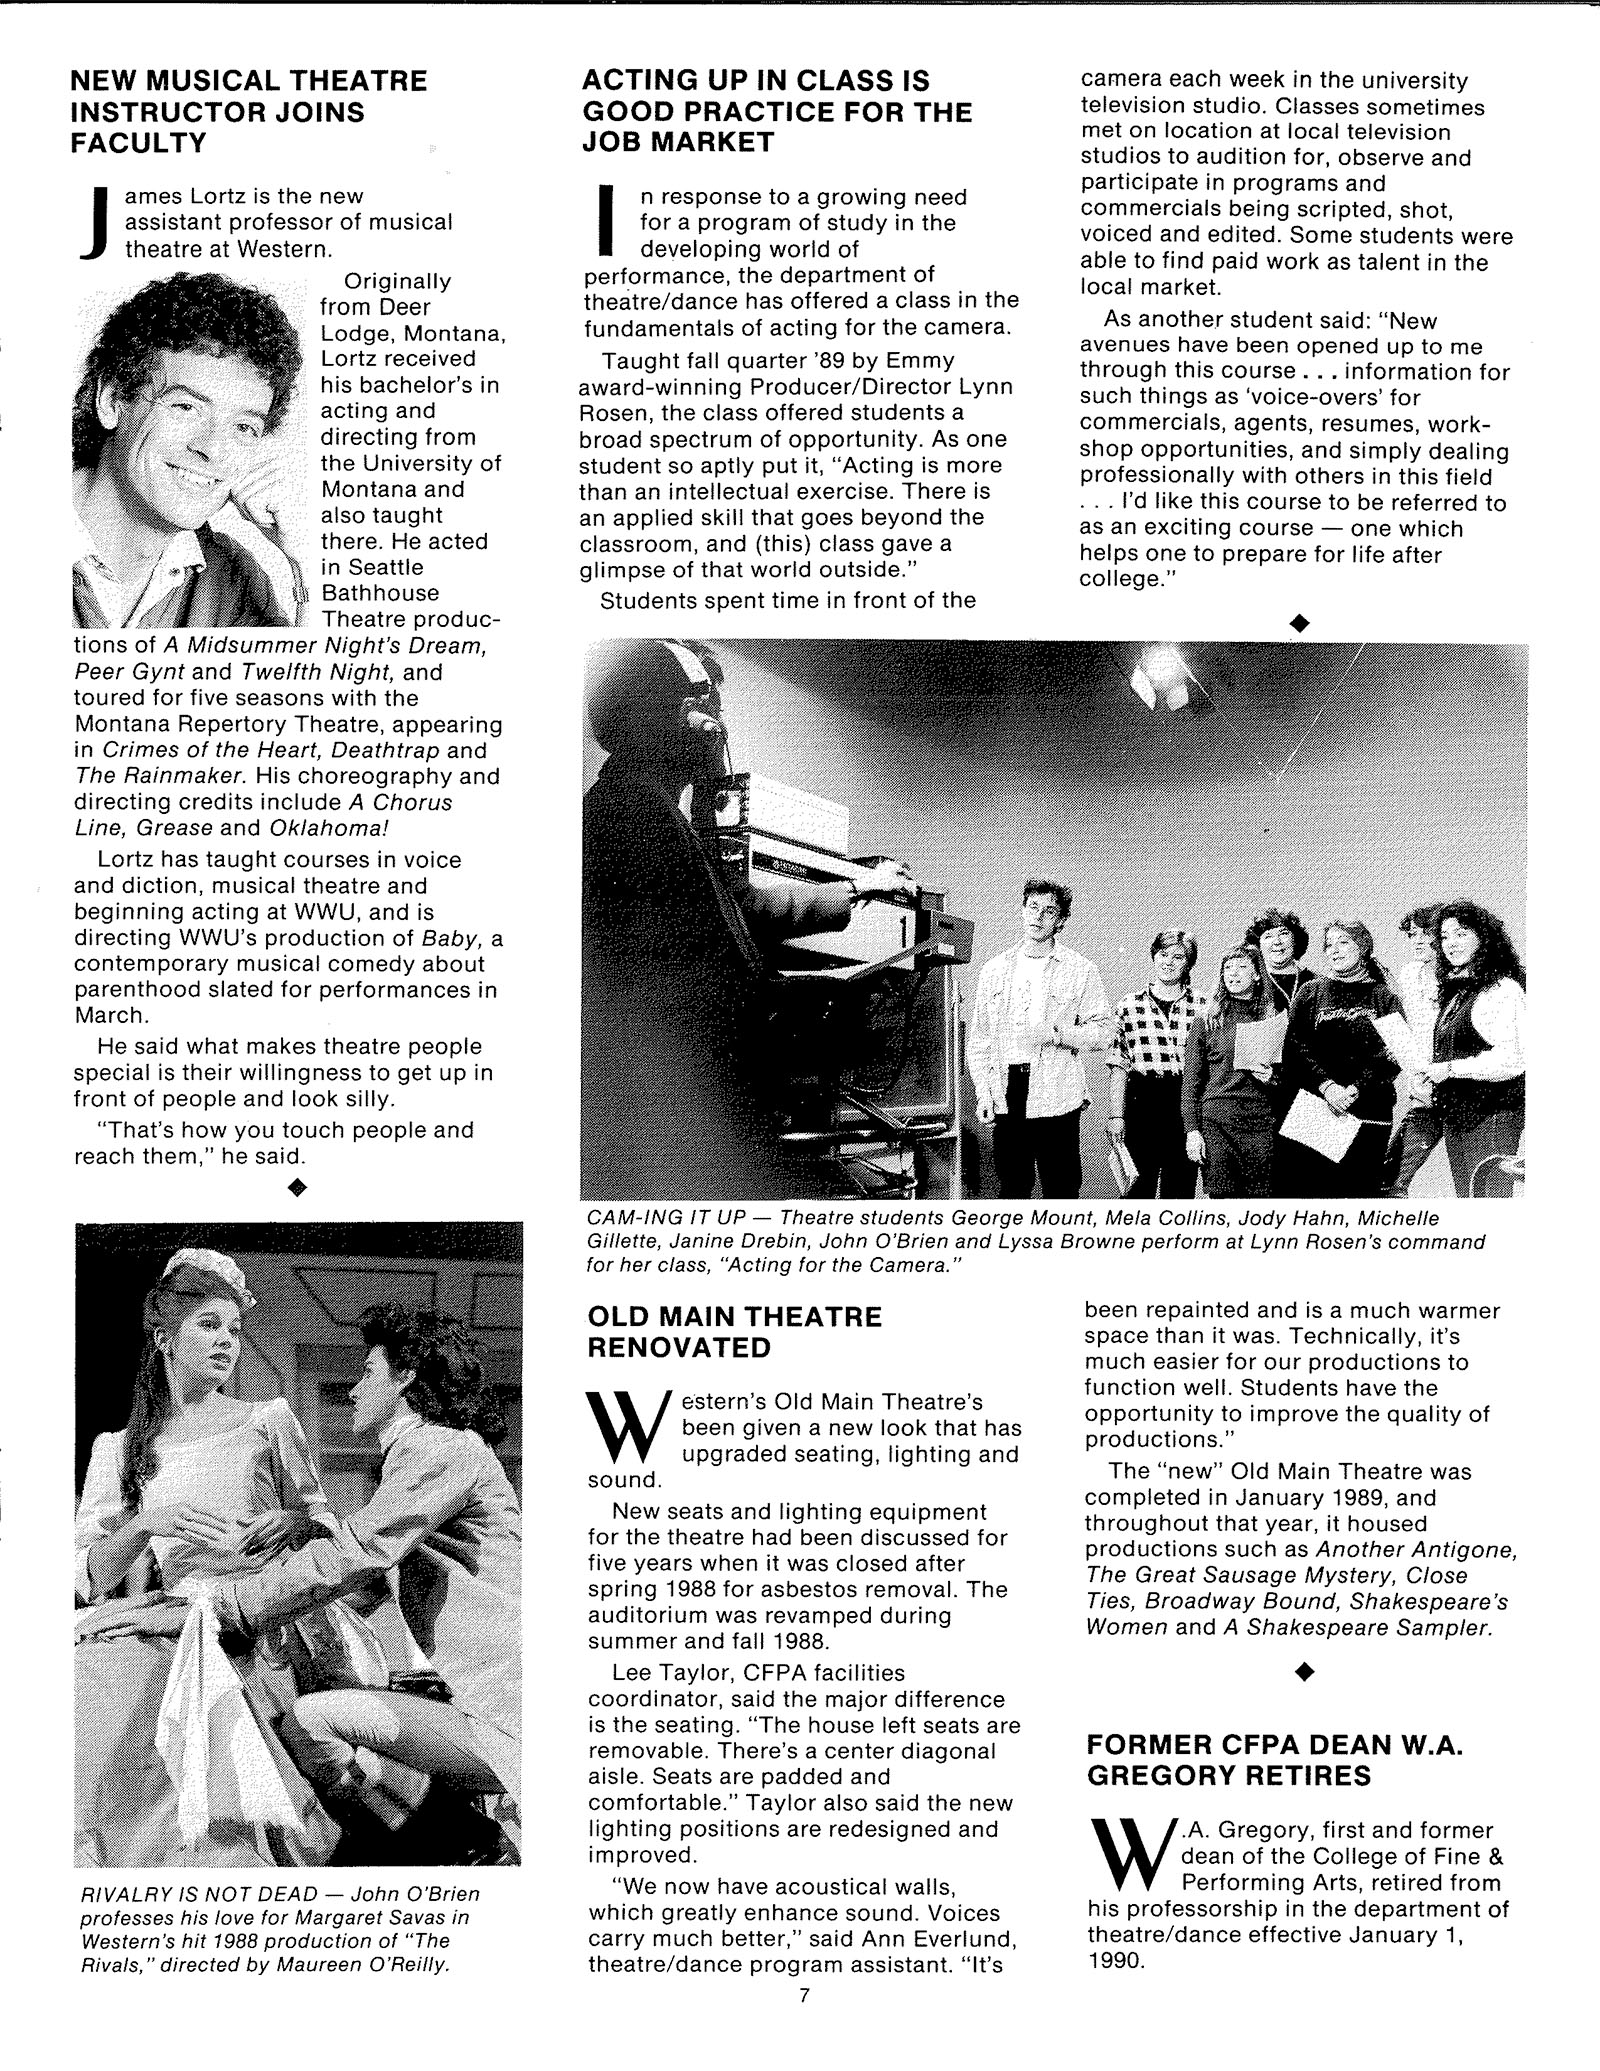 page from an old newsletter with picture of Jim. Newsletter article reproduced on webpage in HTML